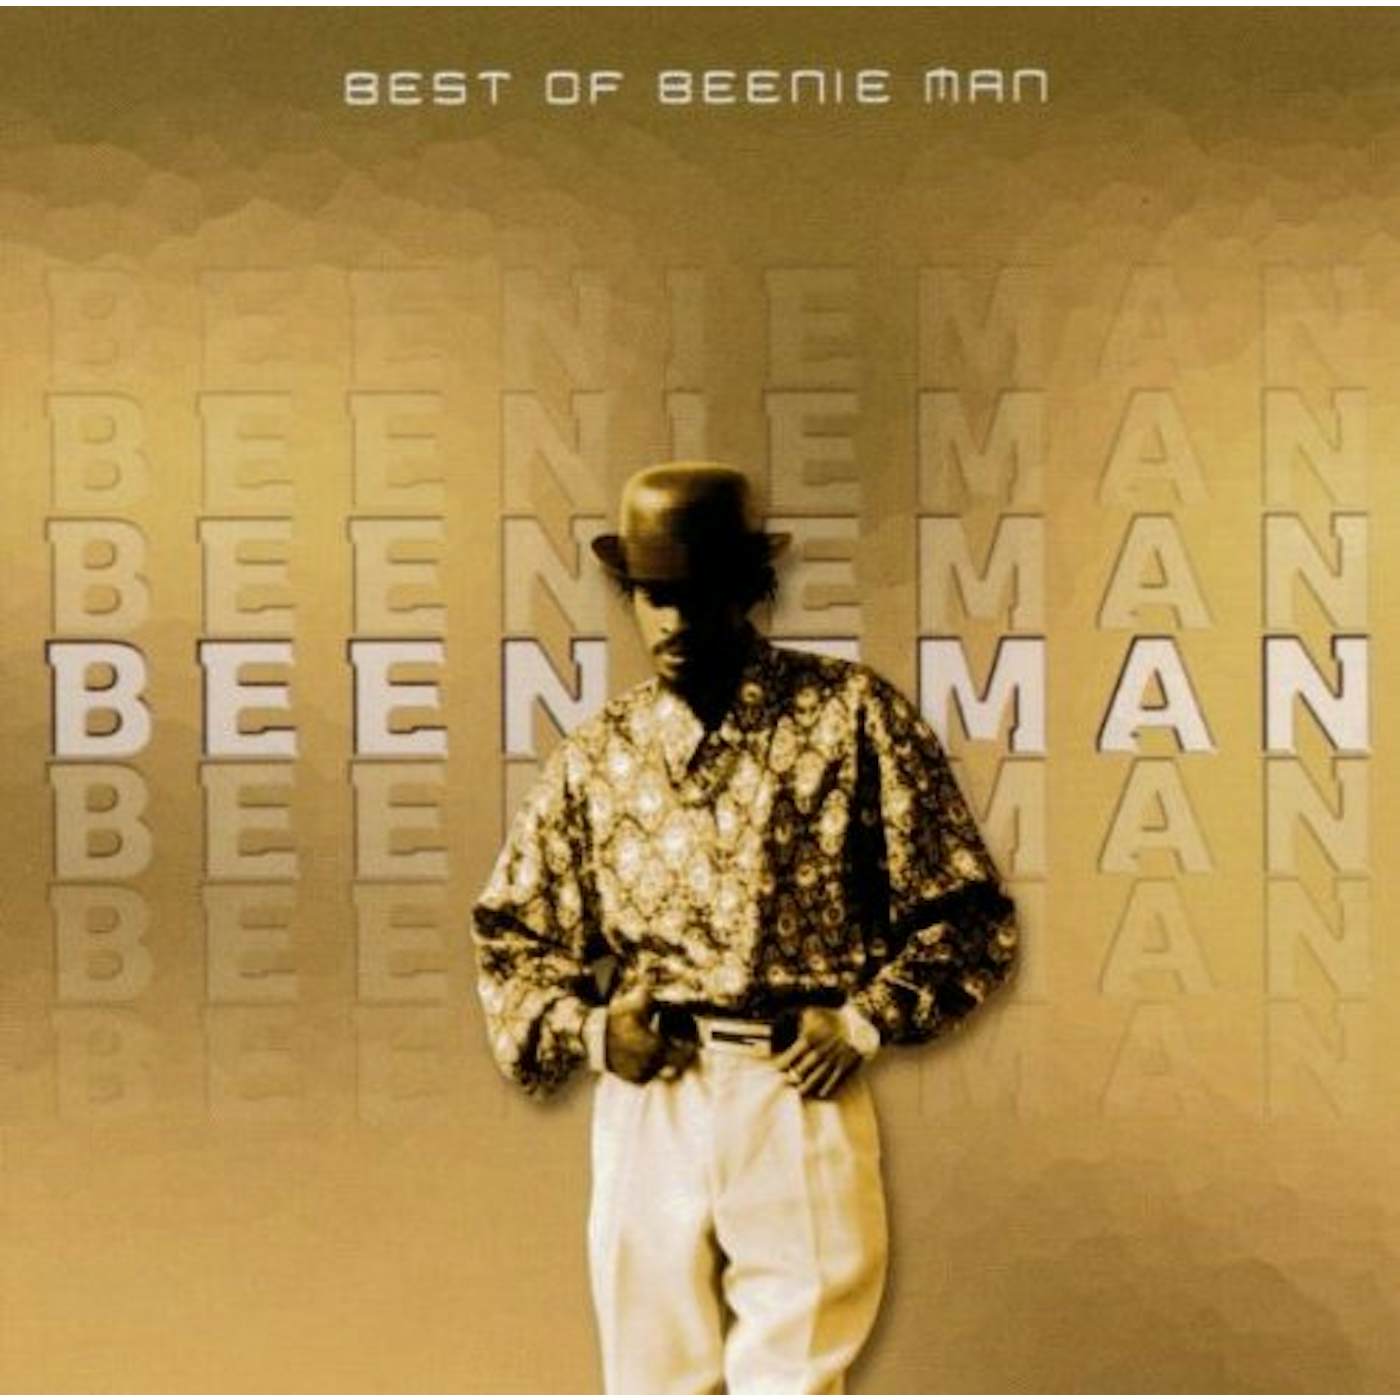 BEST OF BEENIE MAN COLLECTOR'S EDITION CD